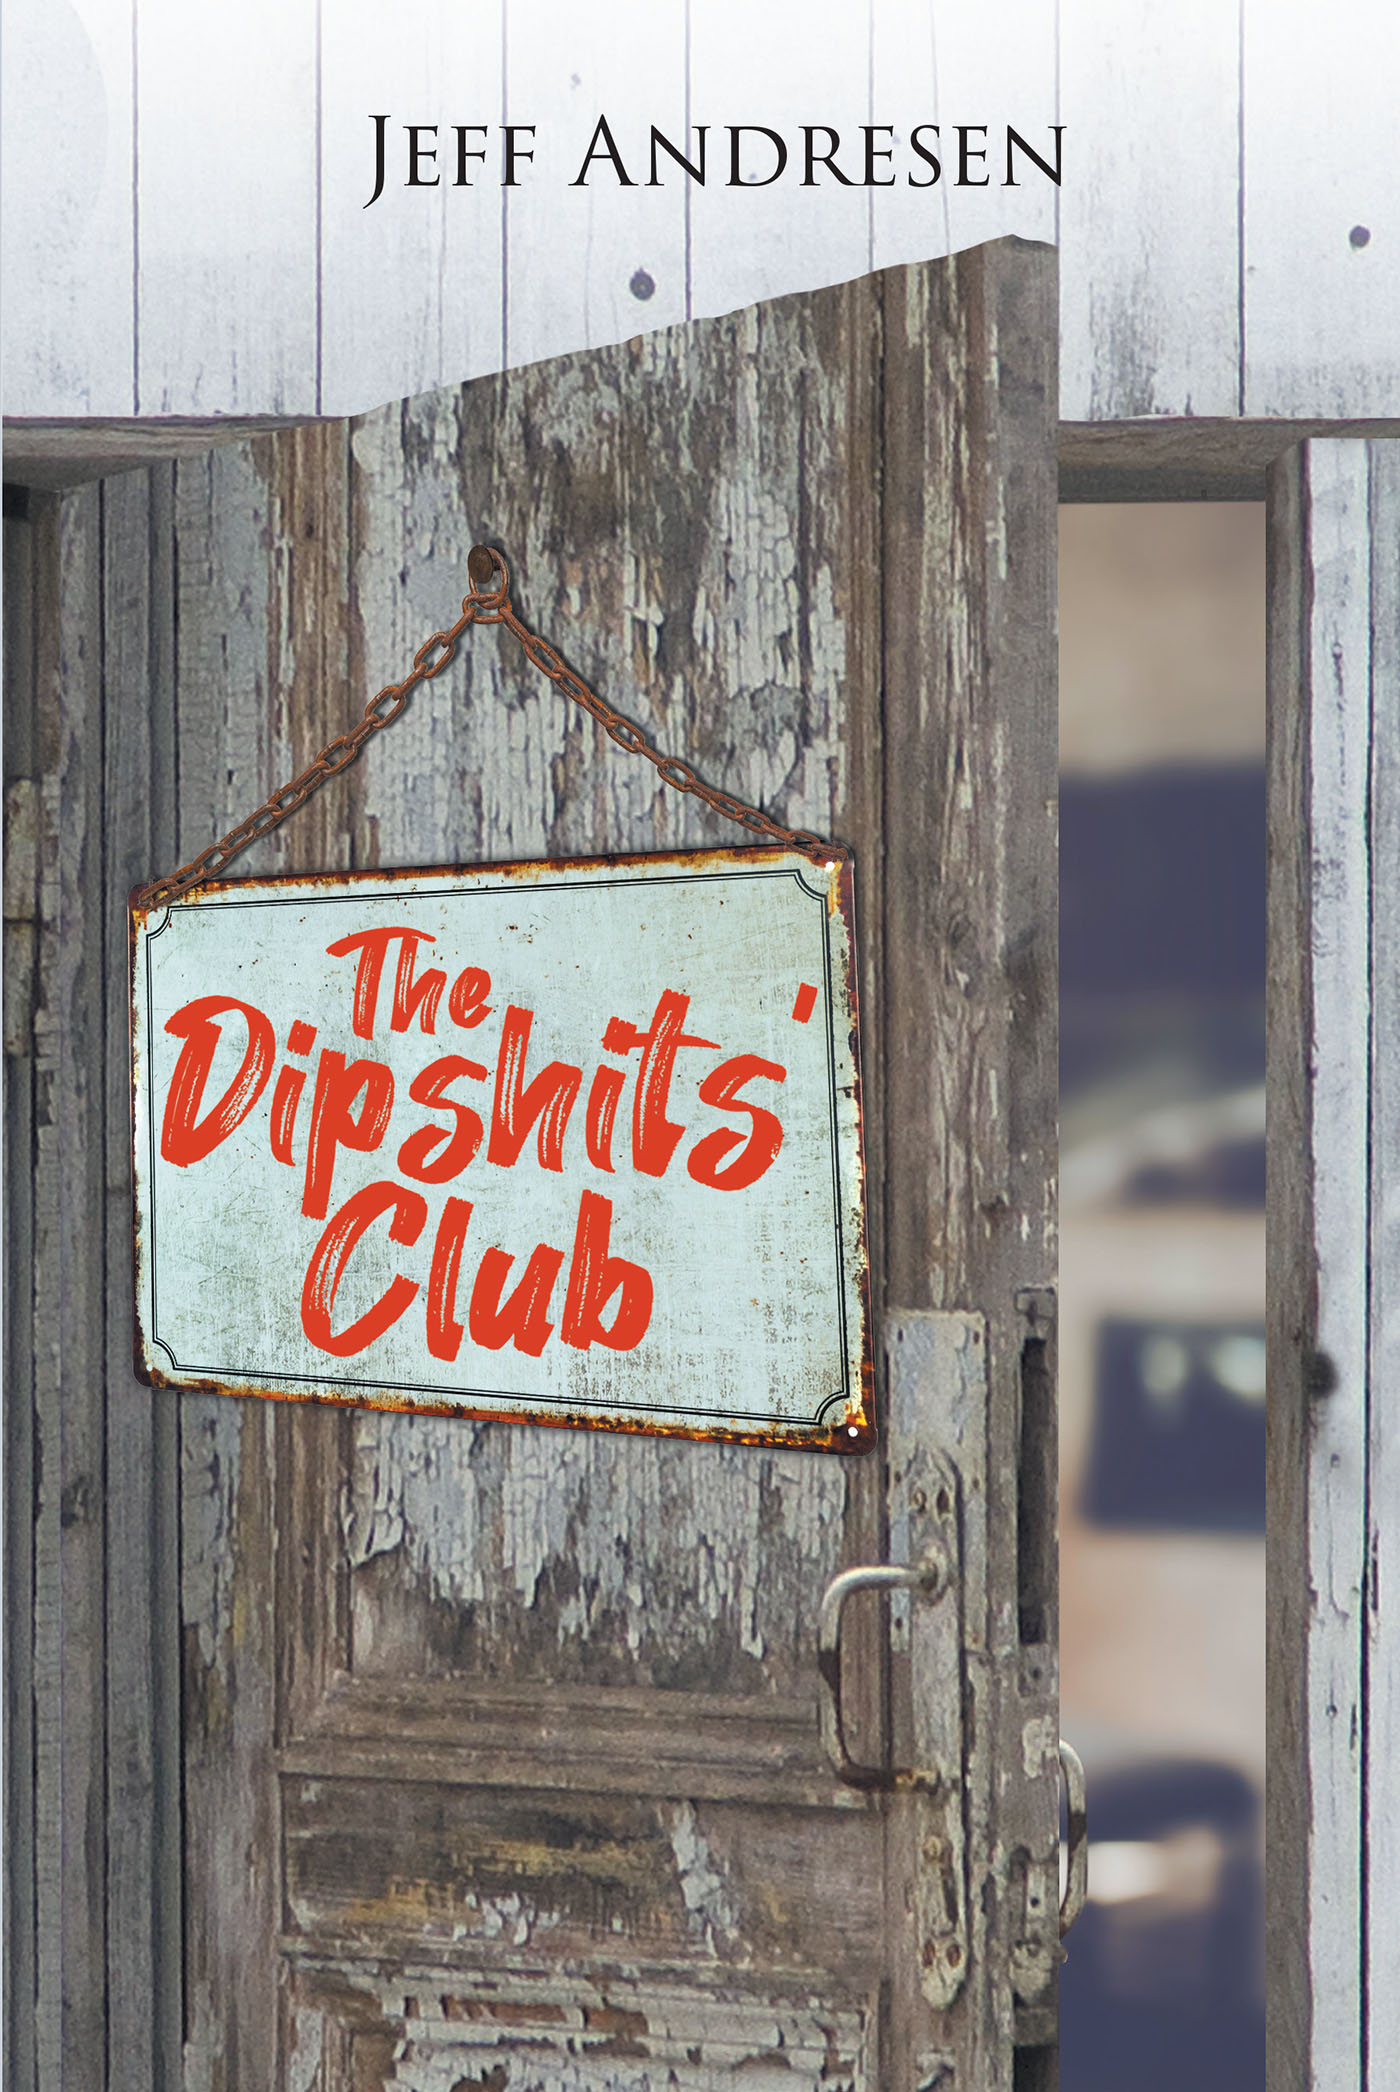 Author Jeff Andresen’s New Book, “The Dipsh*ts' Club,” is a Hilarious Collection of Awkward and Comedic Tales That Will Resonate with Readers from All Walks of Life